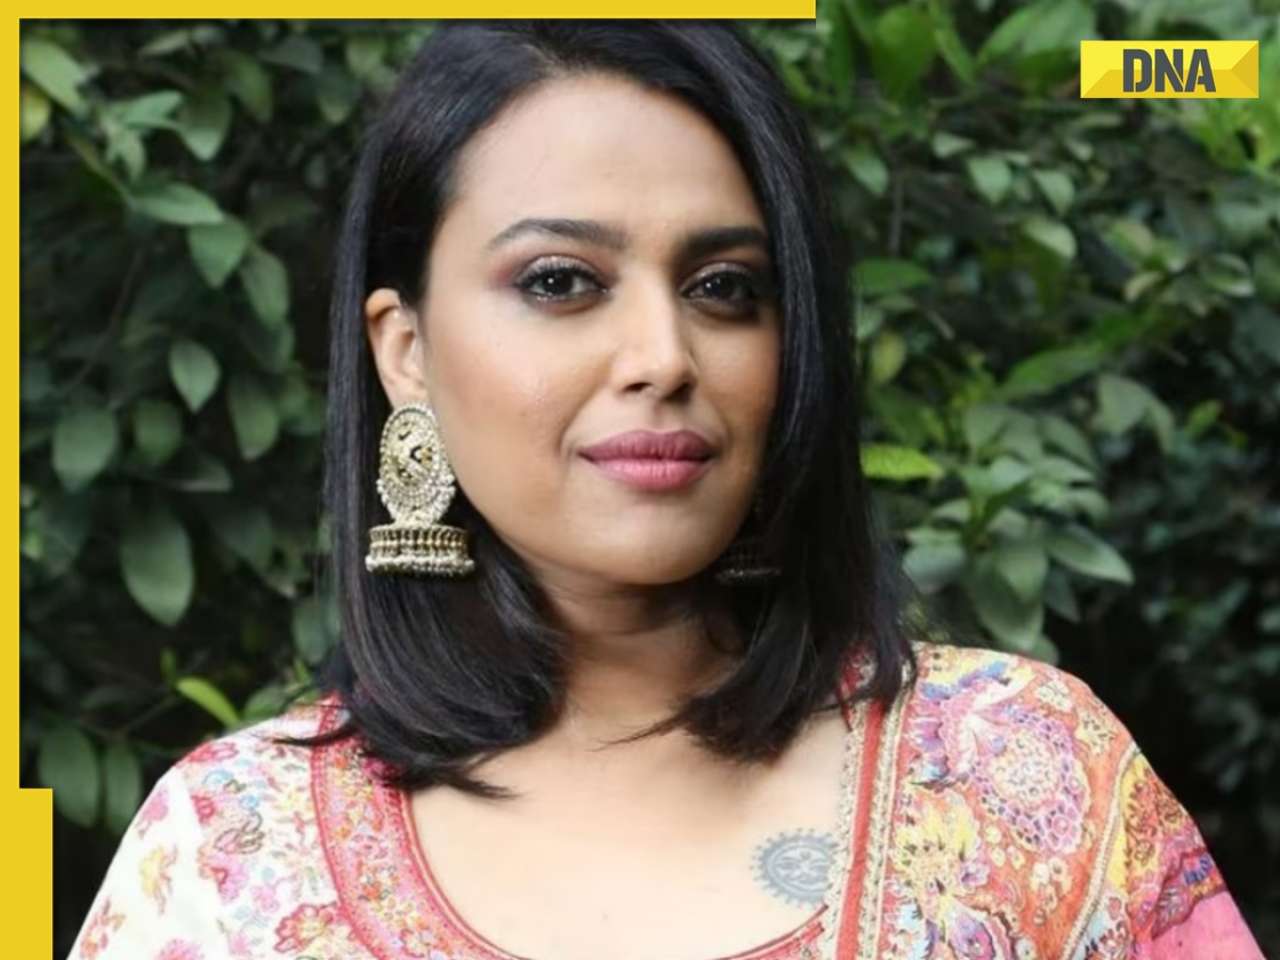 Swara Bhasker slams netizen's 'proud to be vegetarian' post on Bakrid: 'Please relax with the virtue signalling'